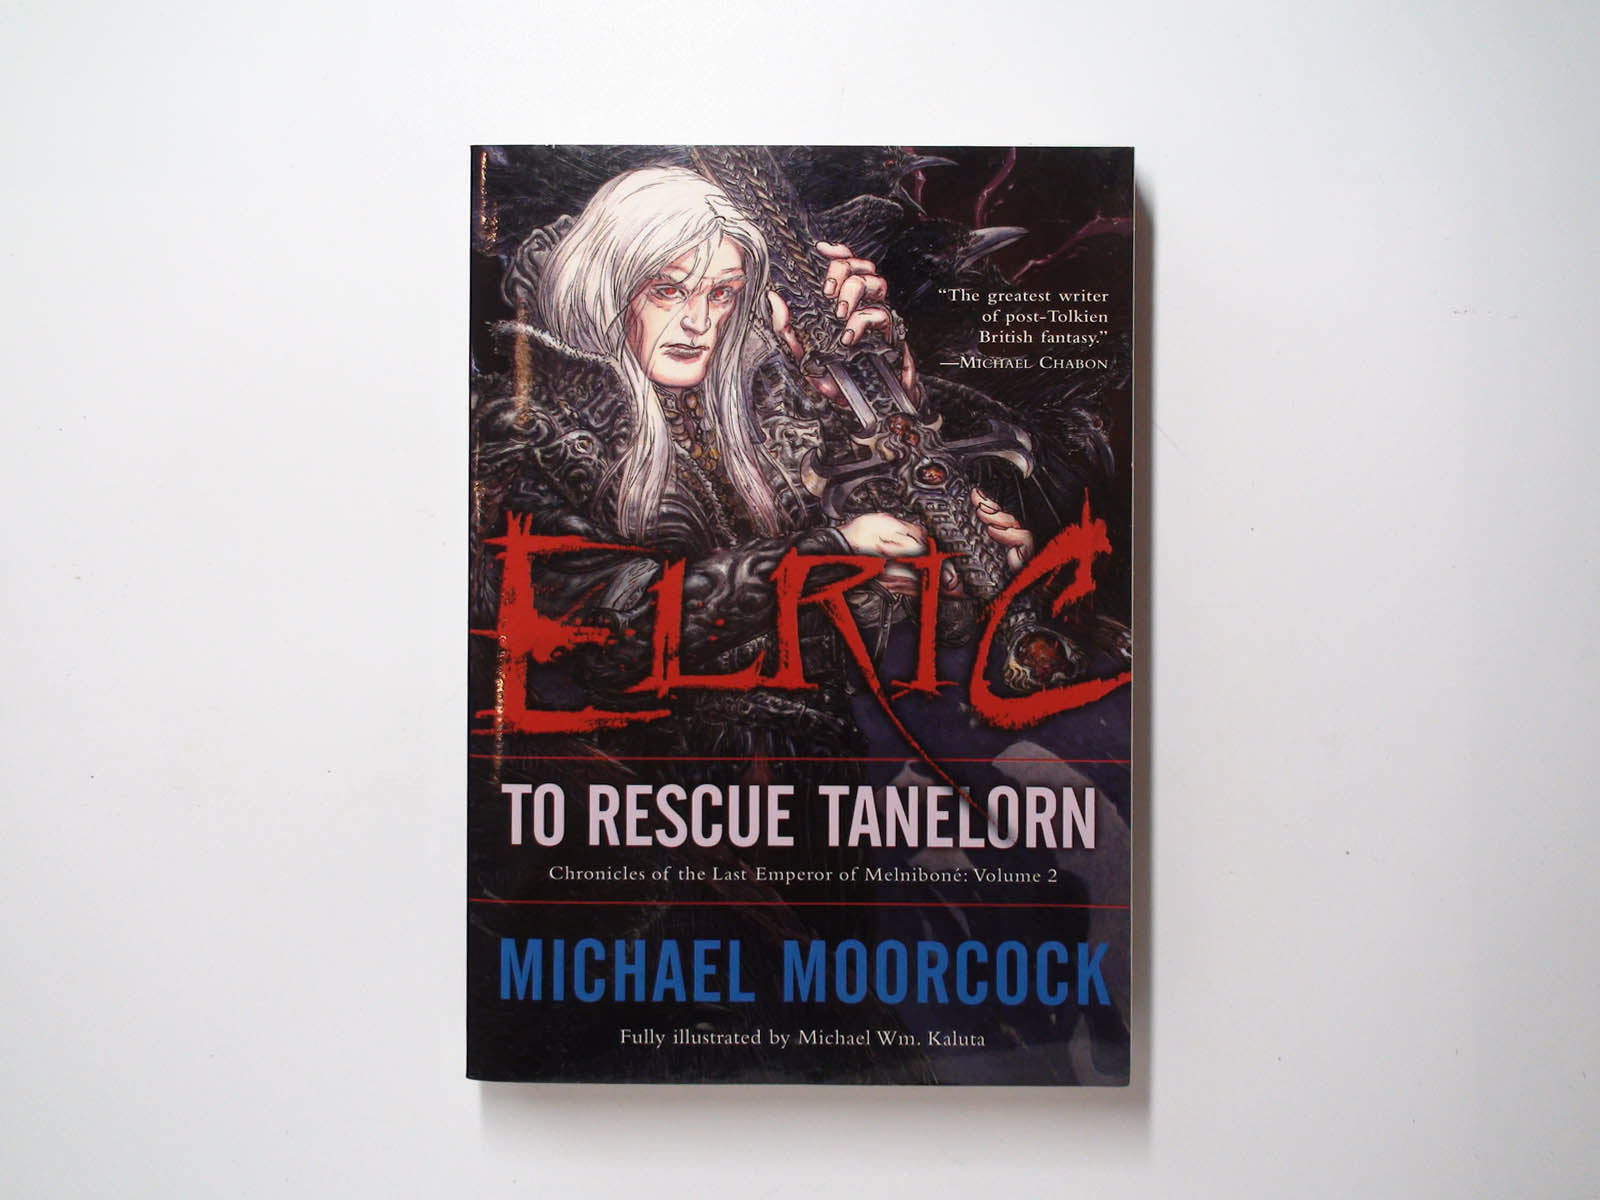 Elric, To Rescue Tanelorn, Michael Moorcock, Paperback, Illustrated, 2008